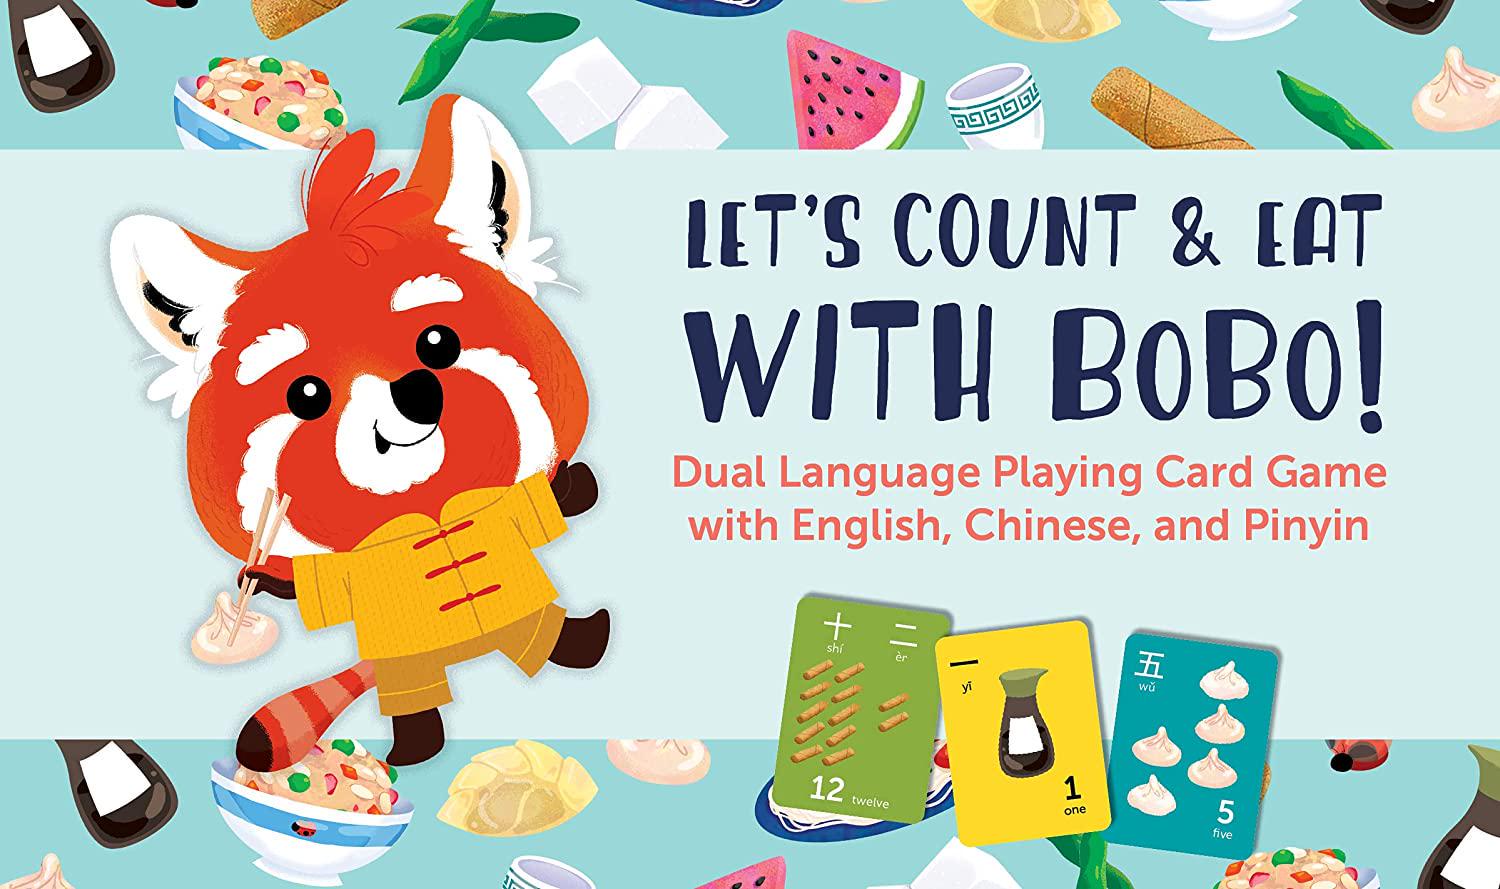 SunBridge, Let's Count and Eat with Bobo! Dual Language Playing and Counting Flash Card Game for Kids with English, Chinese, and Pinyin